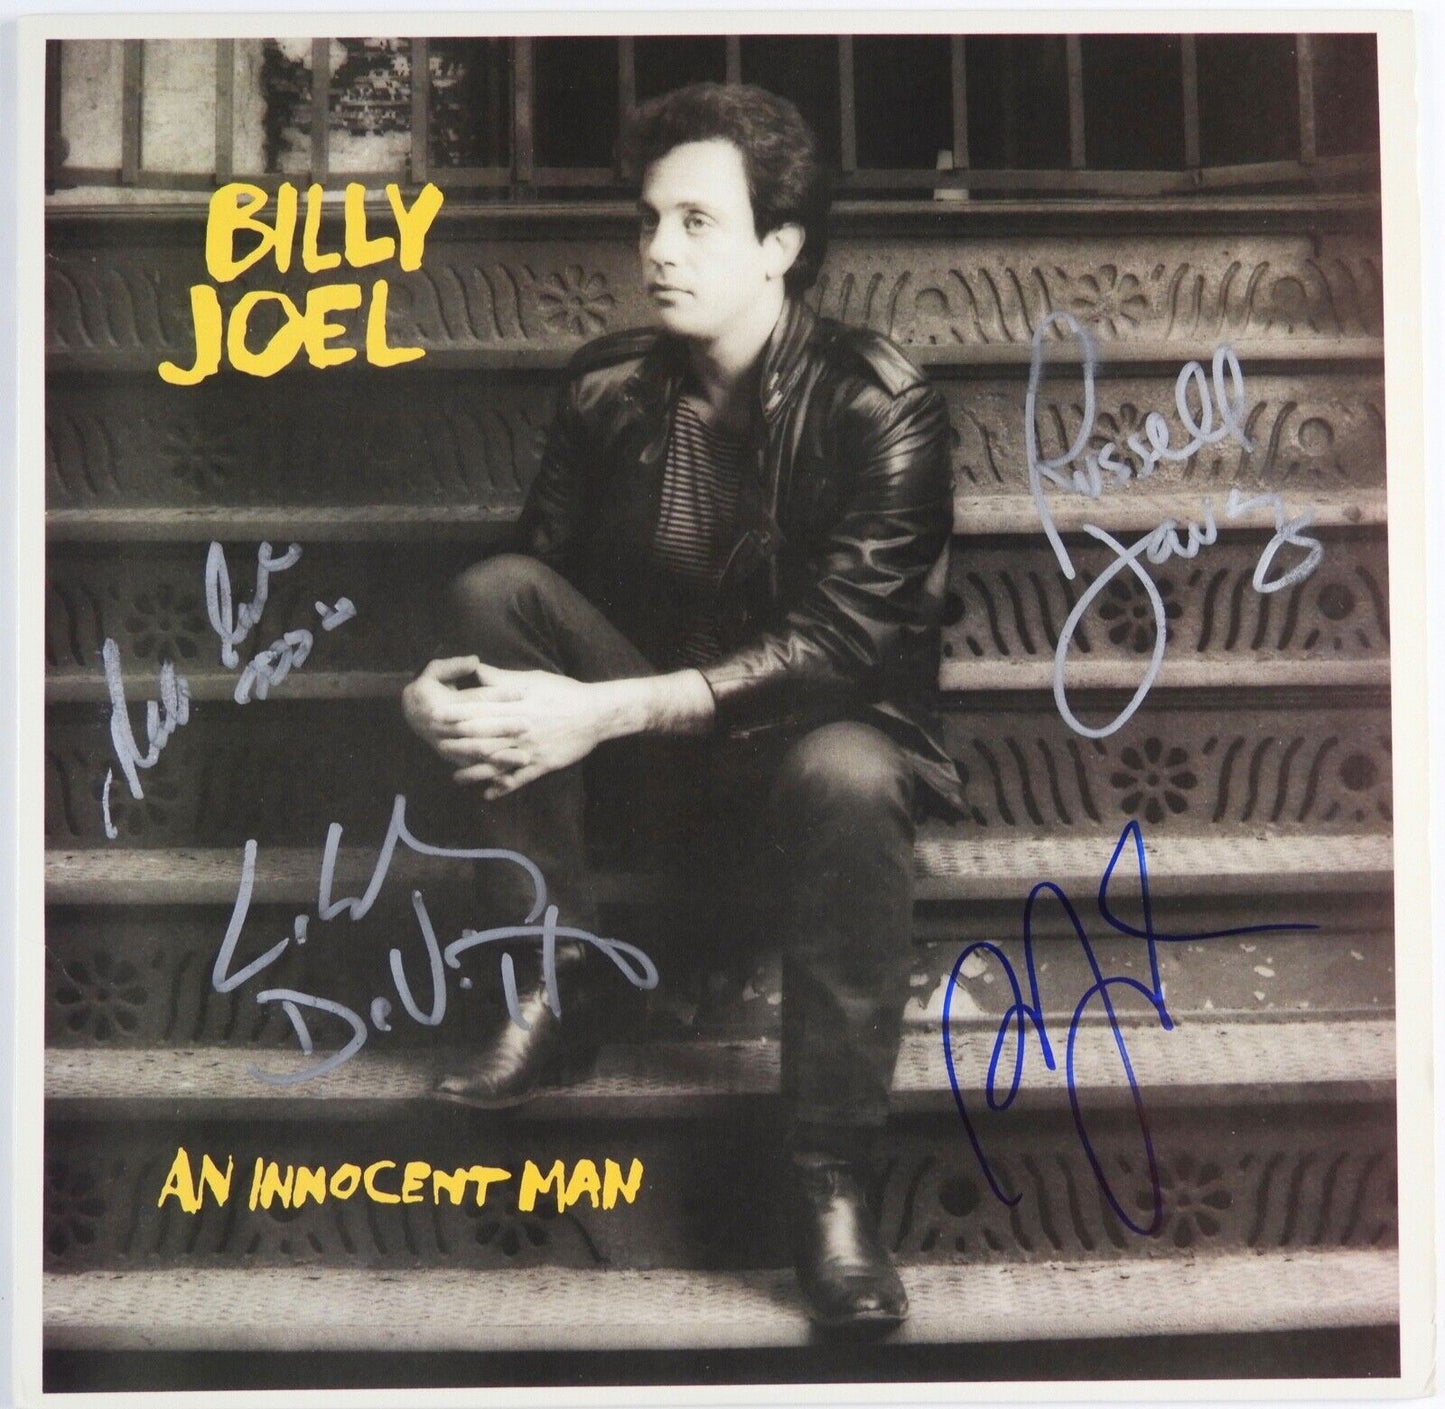 Billy Joel Signed Autograph Album Record with Band REAL Epperson An Innocent Man